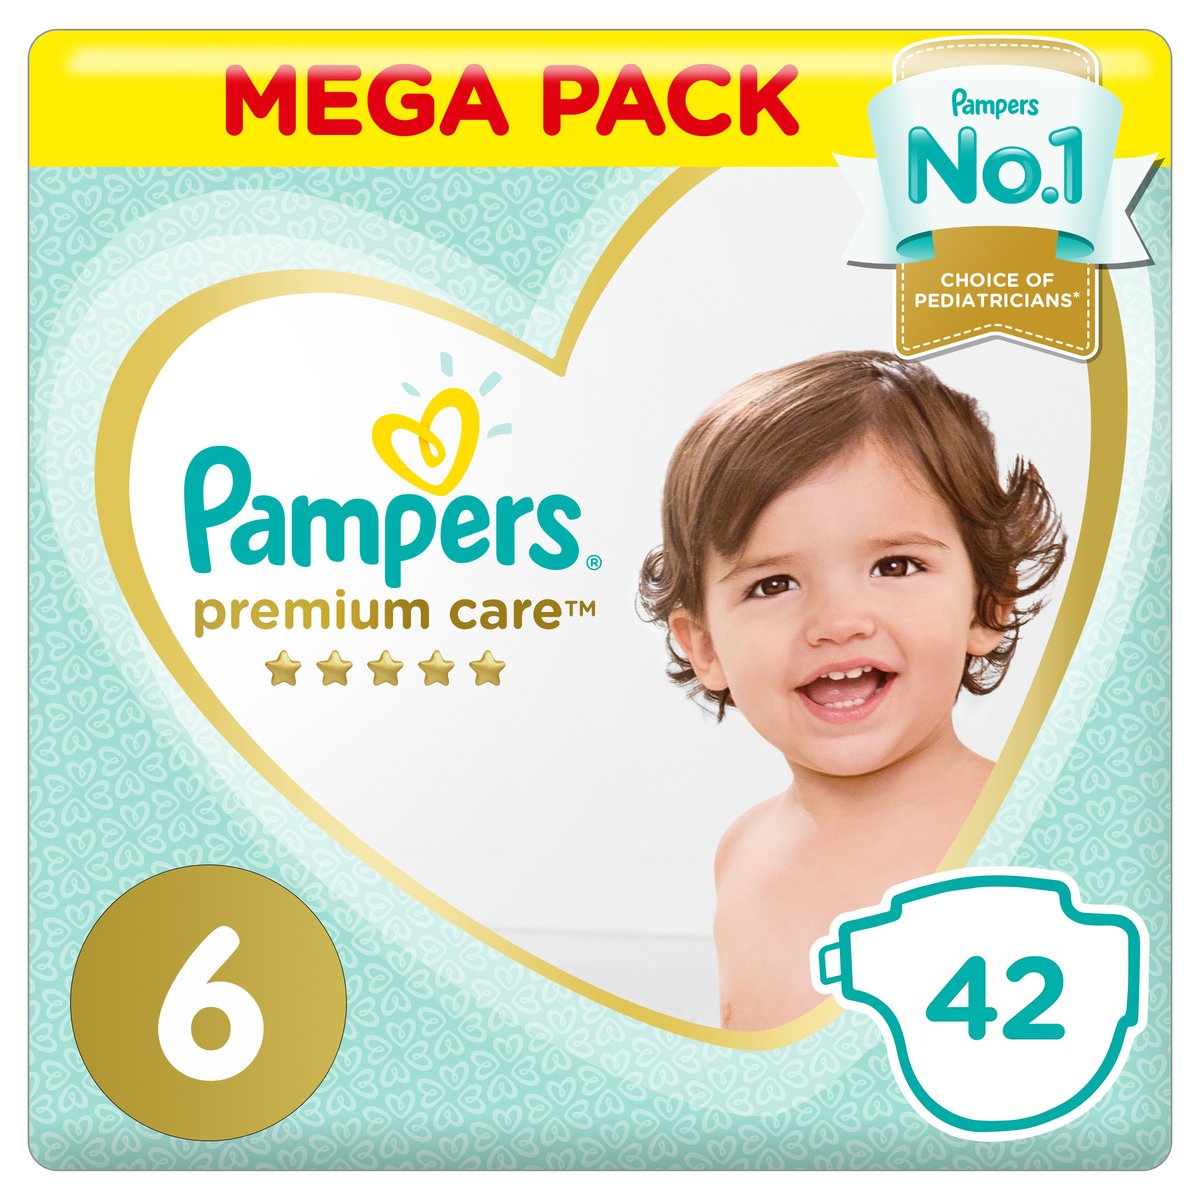 Pampers Premium Care Diapers Size 6 13+ kg Mega Pack 42 Count